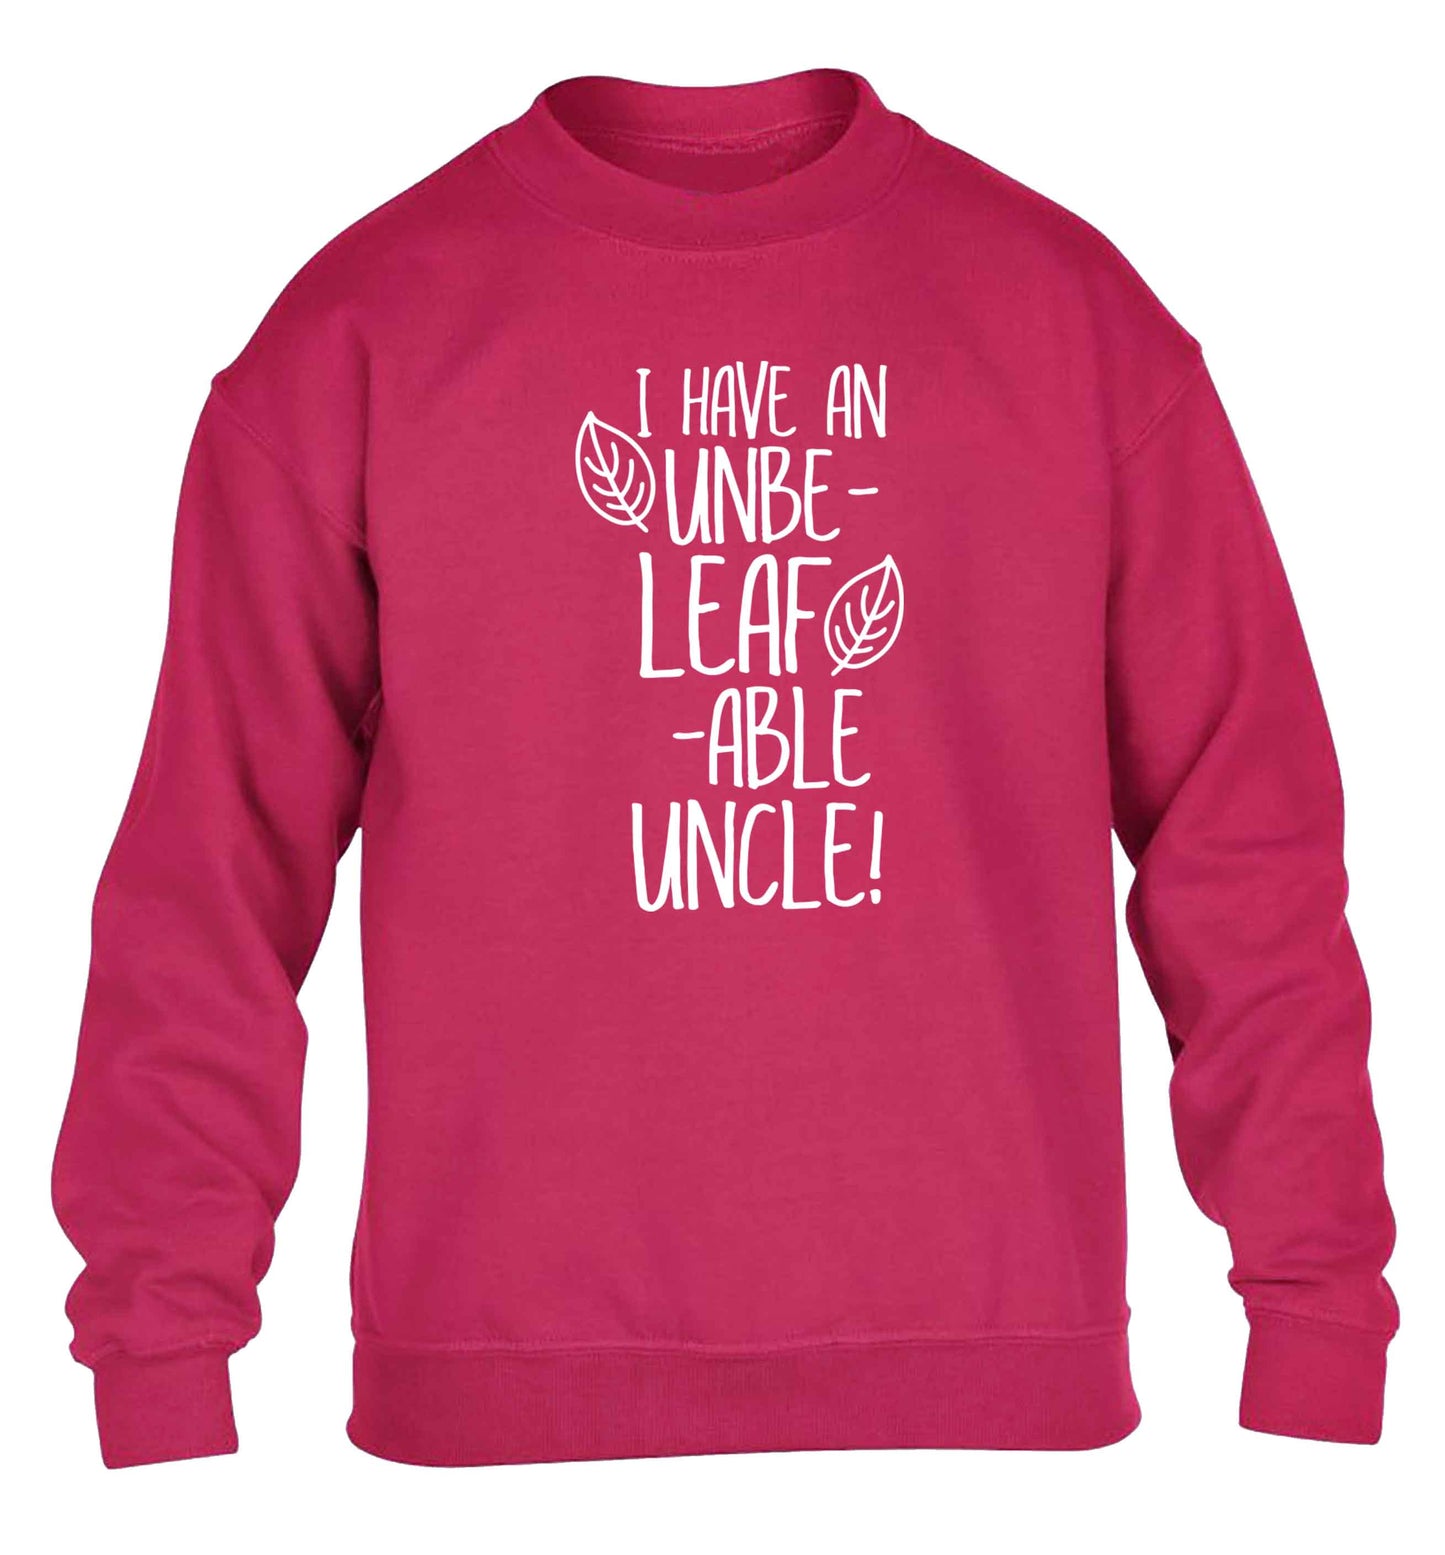 I have an unbe-leaf-able uncle children's pink sweater 12-13 Years